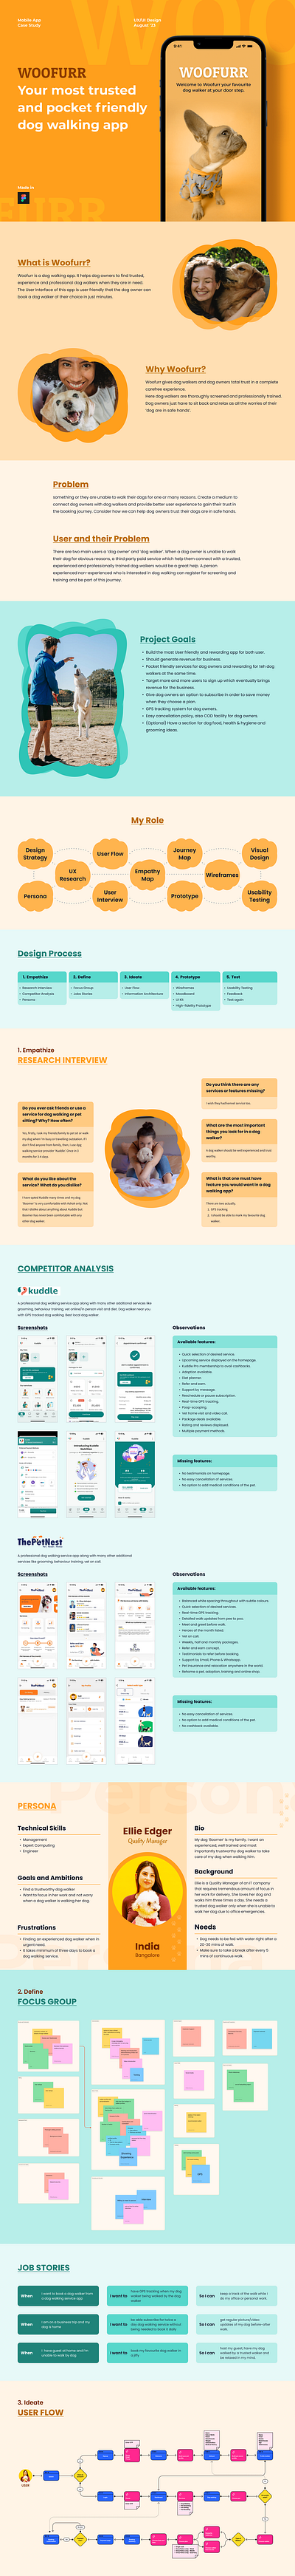 WOOFURR Dog Walking App - UX Case Study app case study competitor analysis design system dogwalking information architure moodboard persona prototype ui design ui kit usability testing user experience user flow user reasearch ux ux design wireframes